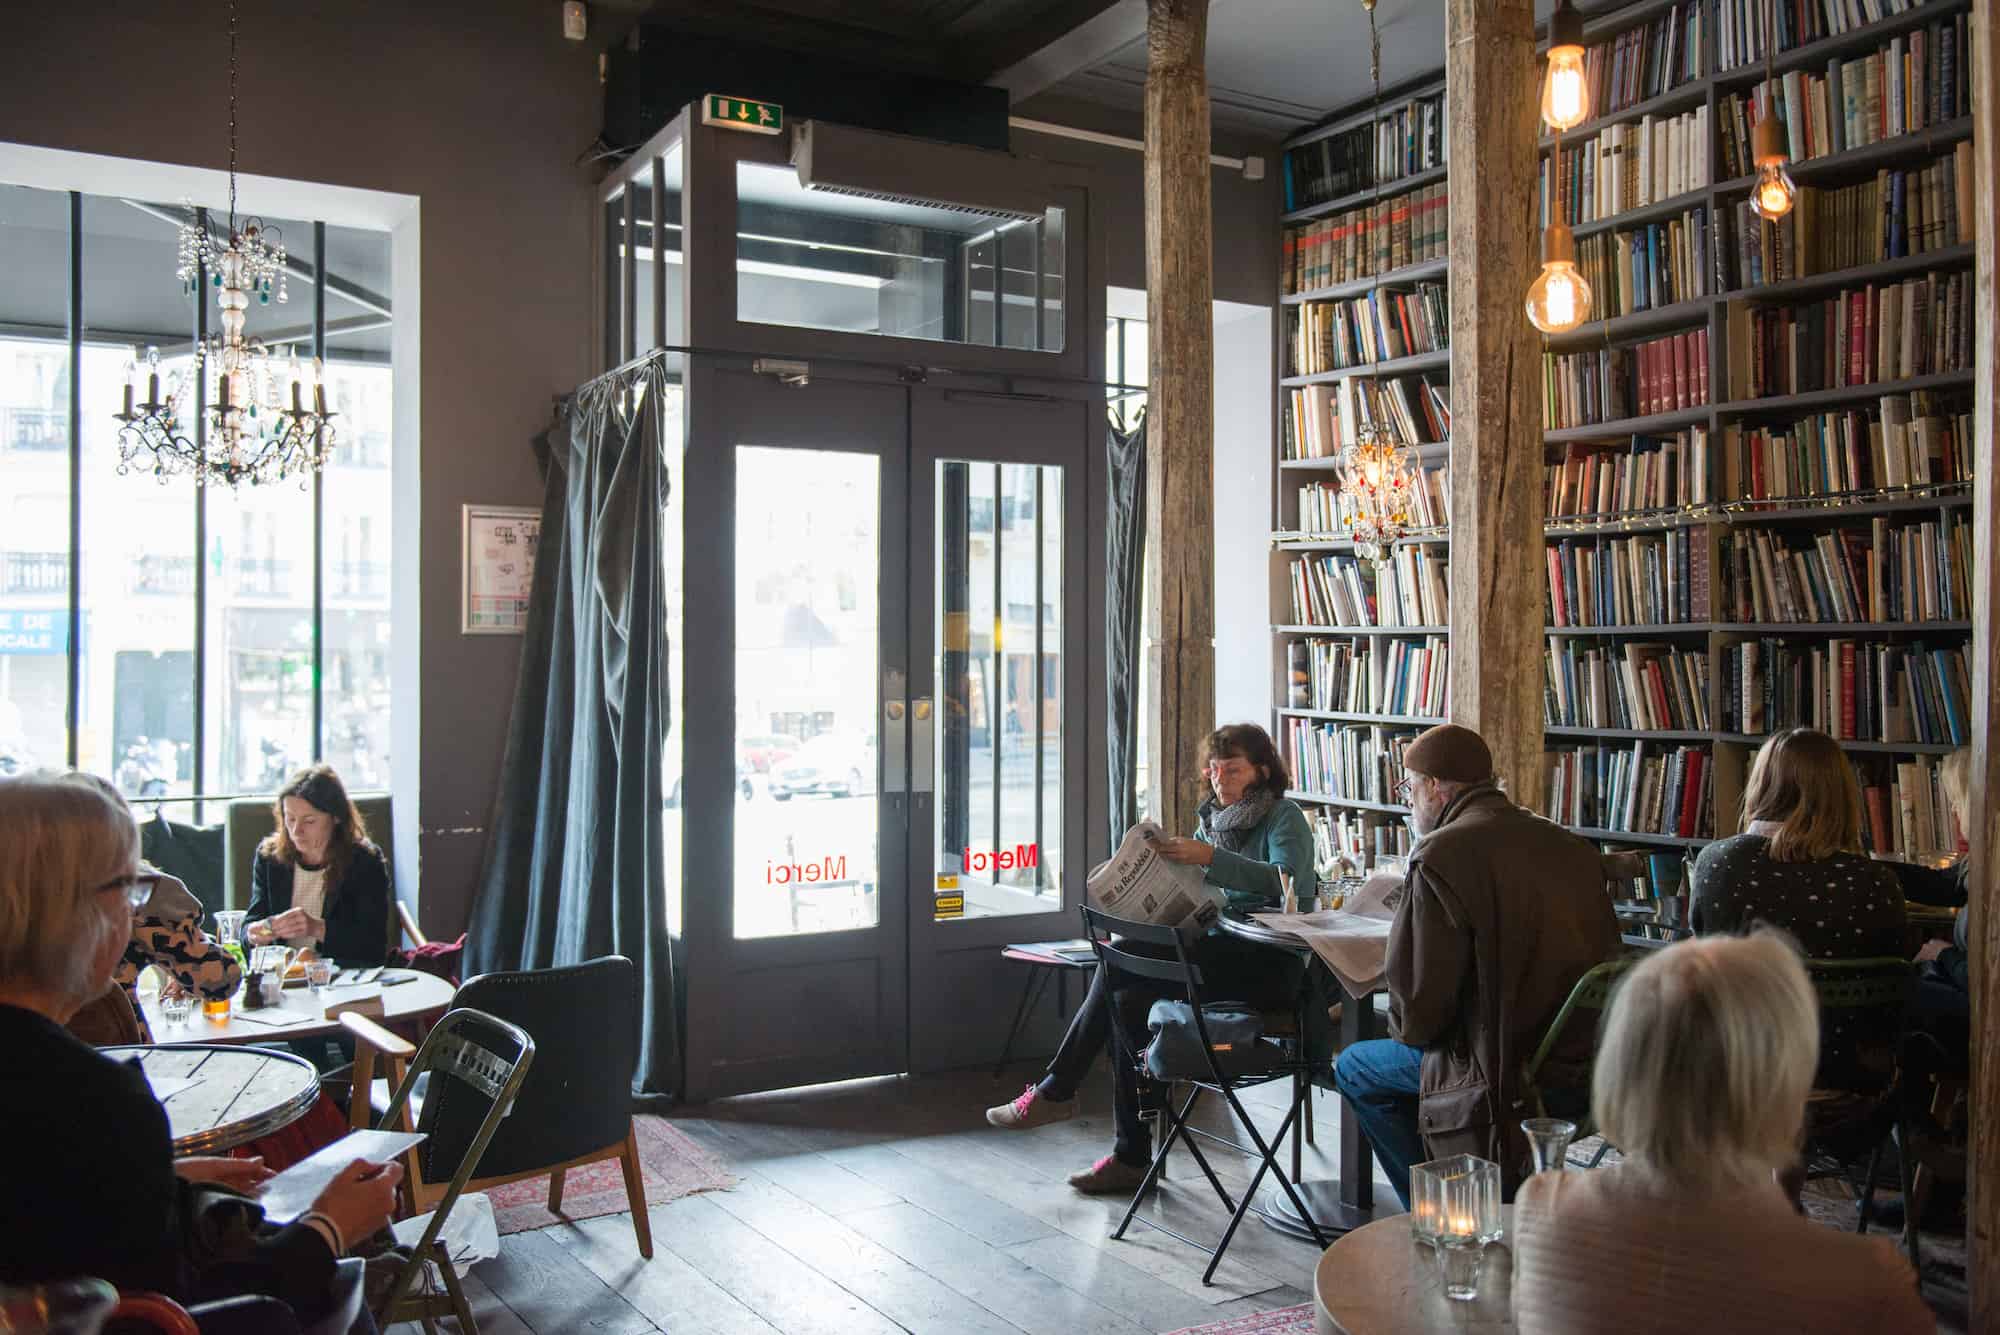 HiP Paris Blog rounds up Paris' best concept store cafes like at Merci, where the walls are lined with second-hand books.